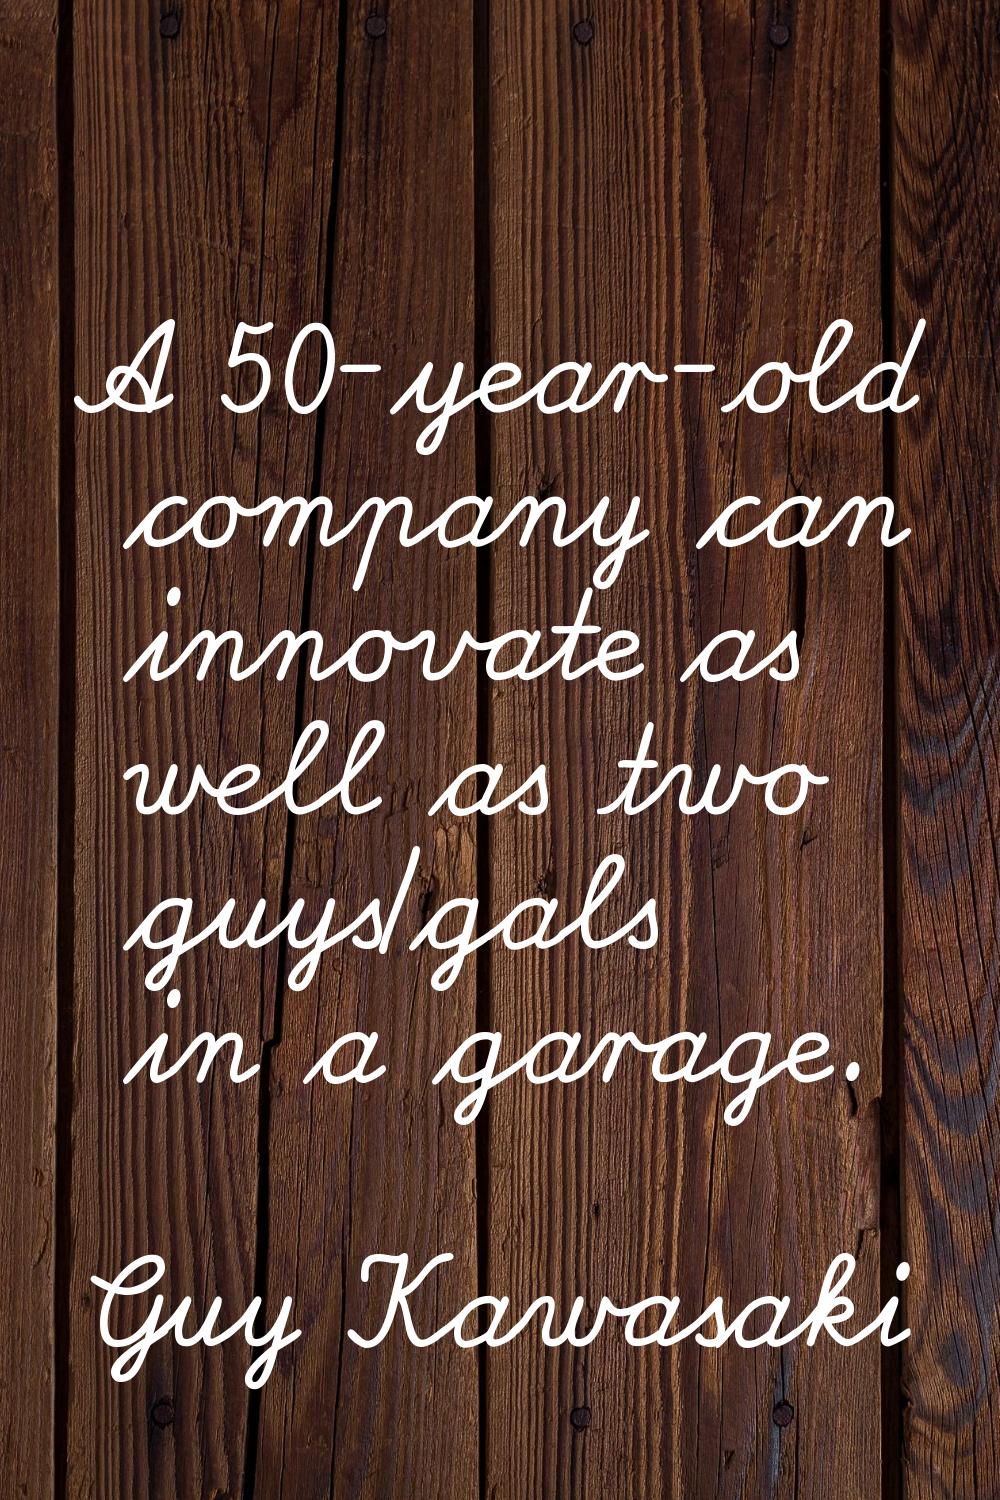 A 50-year-old company can innovate as well as two guys/gals in a garage.